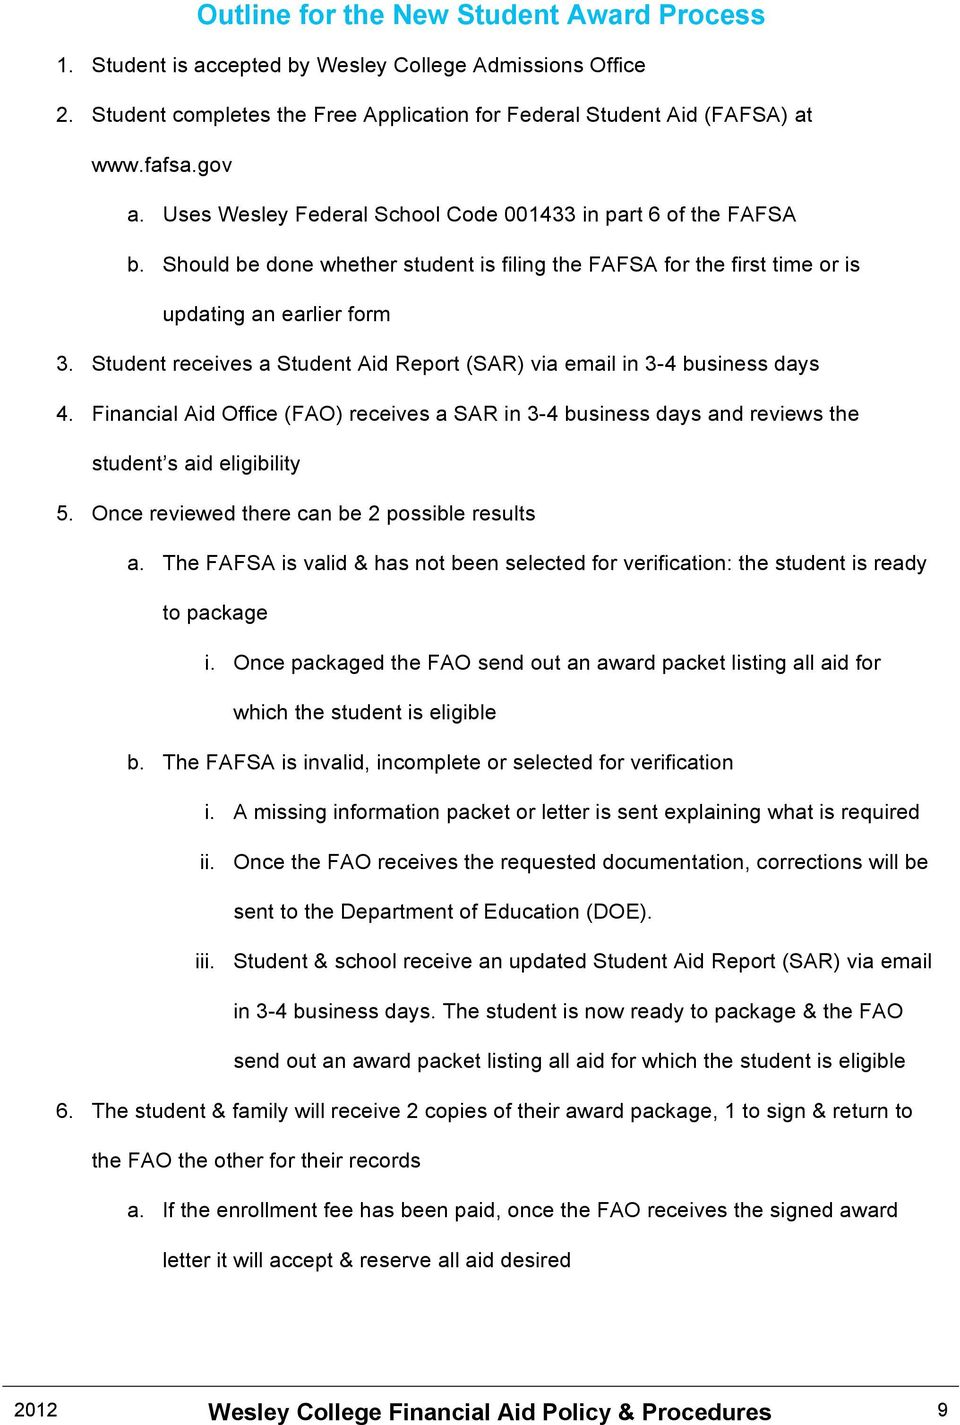 Student receives a Student Aid Report (SAR) via email in 3-4 business days 4. Financial Aid Office (FAO) receives a SAR in 3-4 business days and reviews the student s aid eligibility 5.